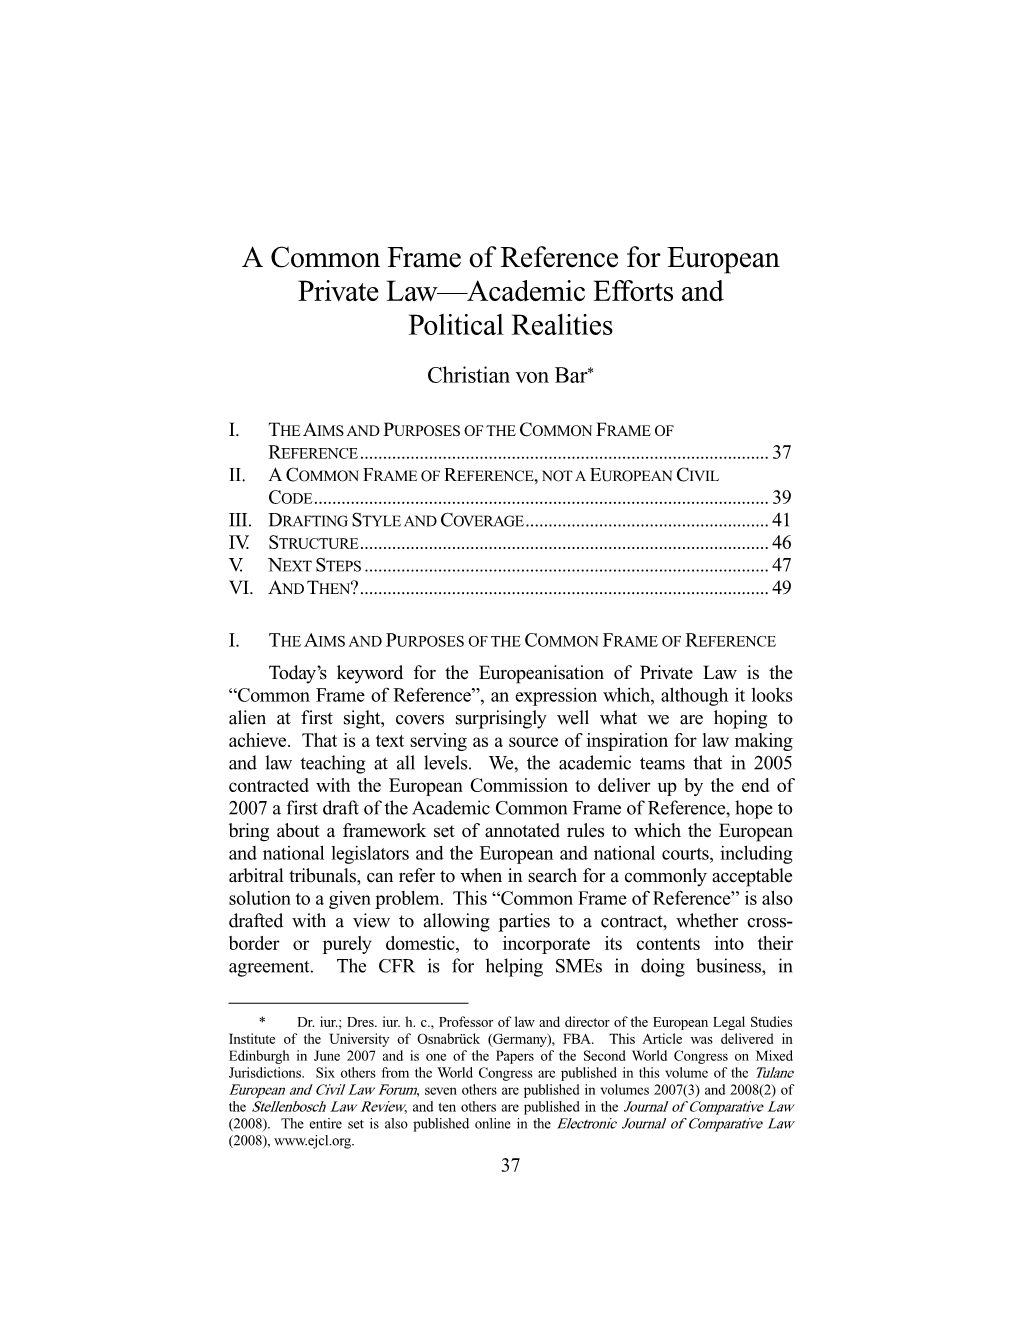 A Common Frame of Reference for European Private Law—Academic Efforts and Political Realities